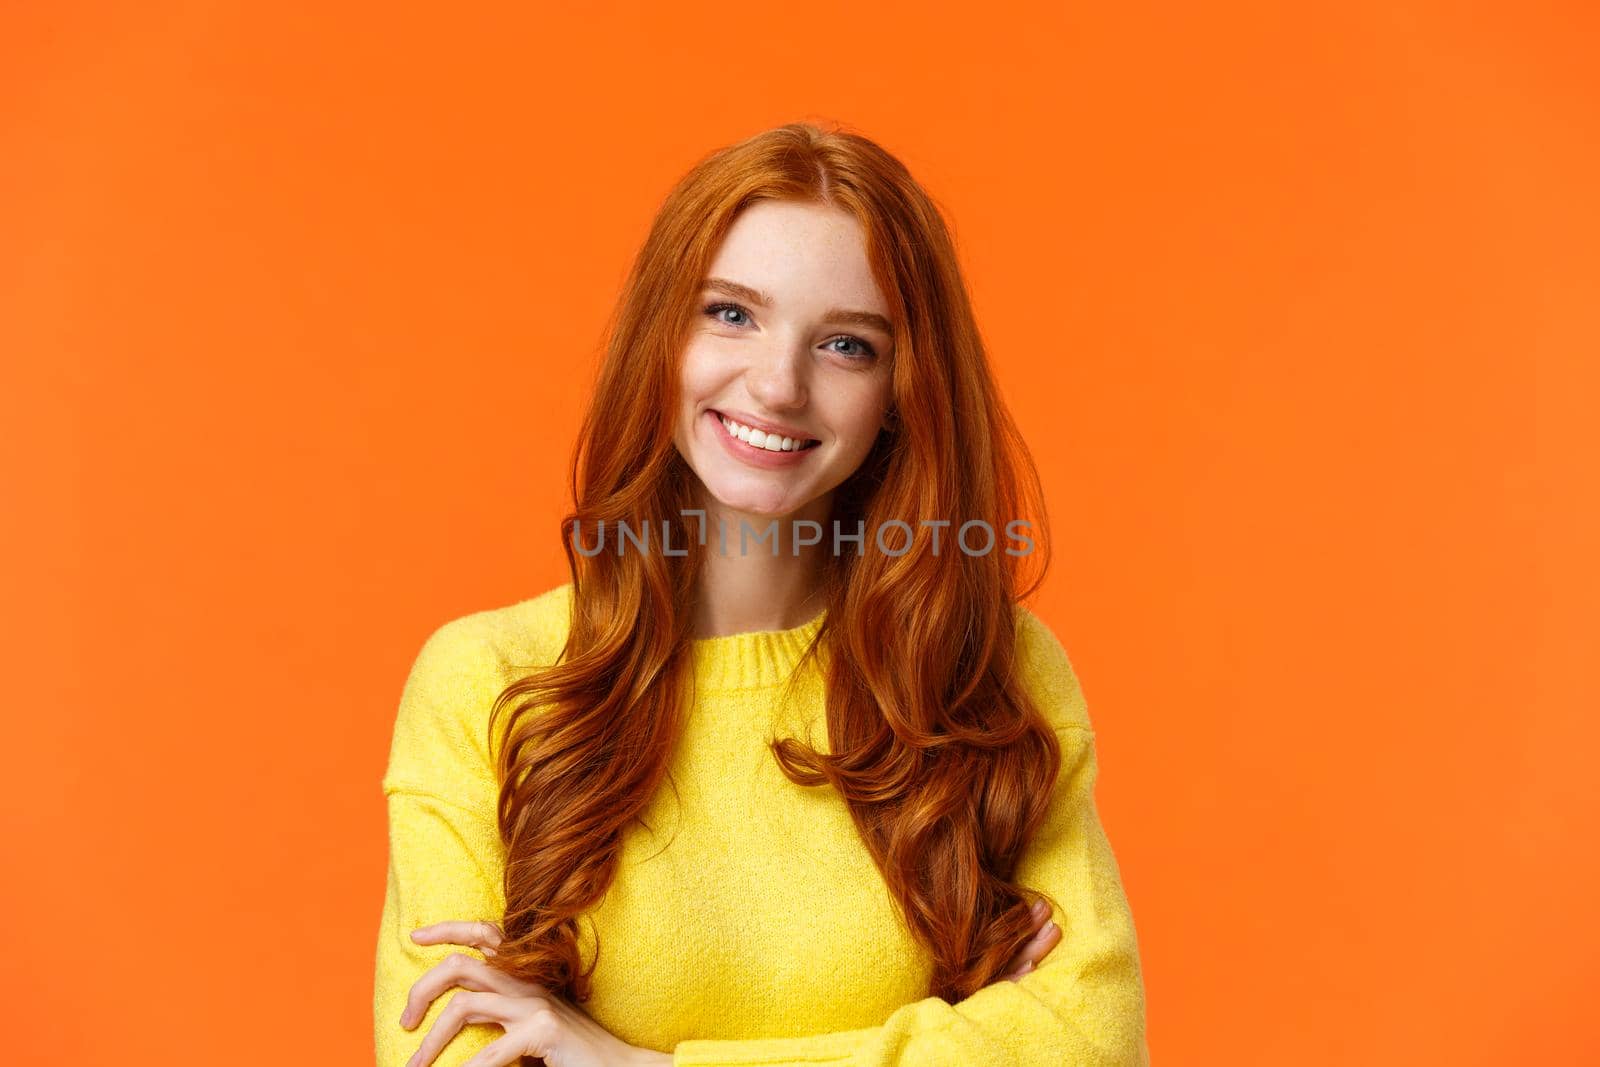 E-commerce, professionalism and employement concept. Cheerful pleasant redhead curly-haired woman in yellow sweater, standing confident with crossed arms and smiling camera.